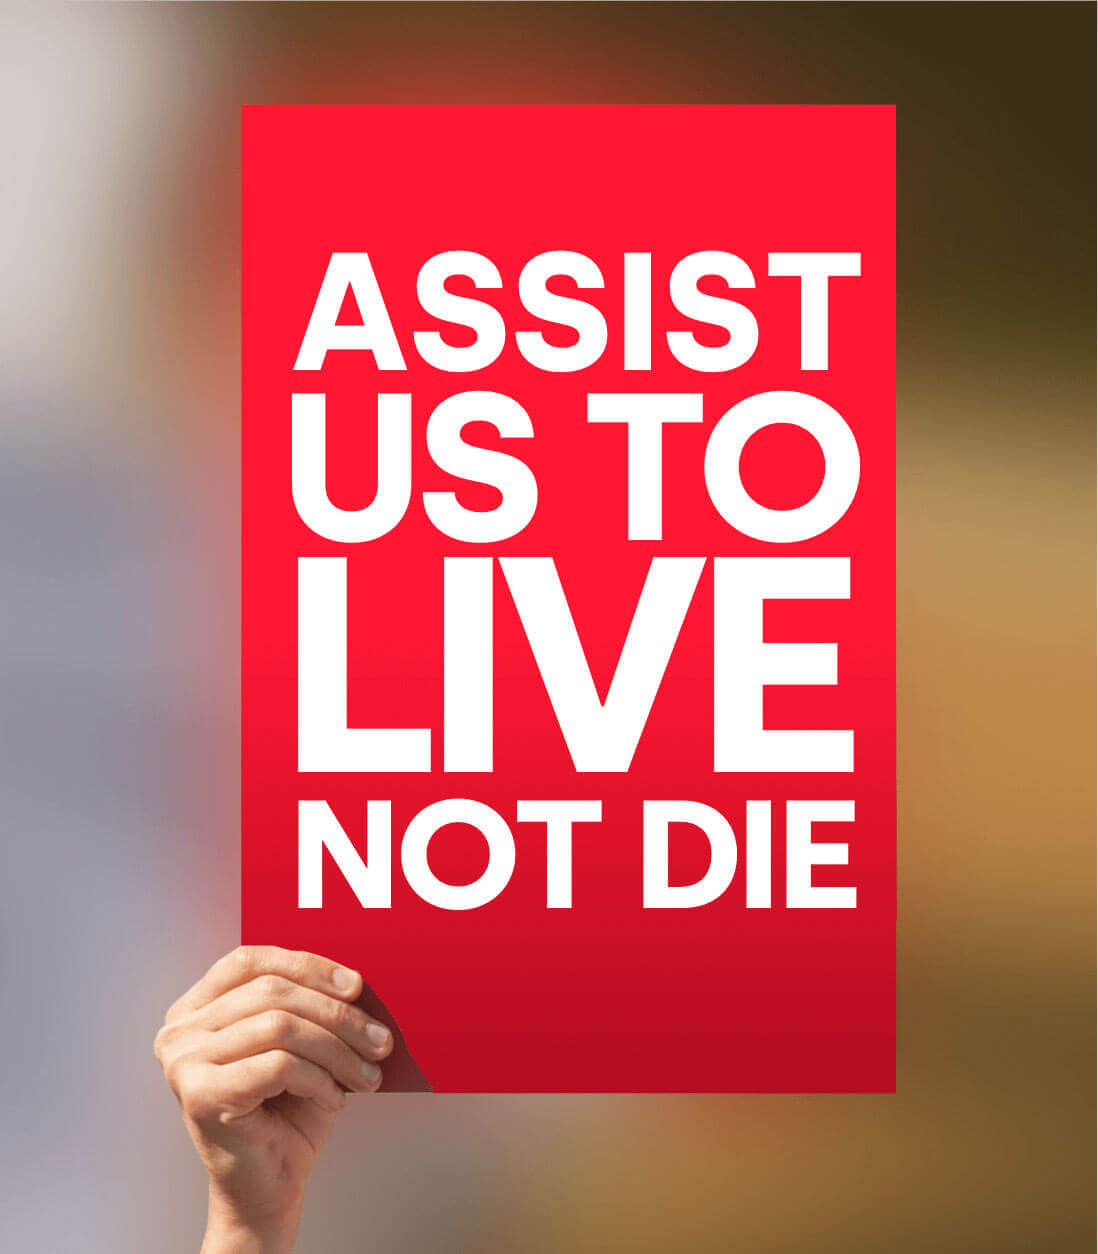 Act now and ask your MP to oppose introducing assisted suicide side panel 2 1 1